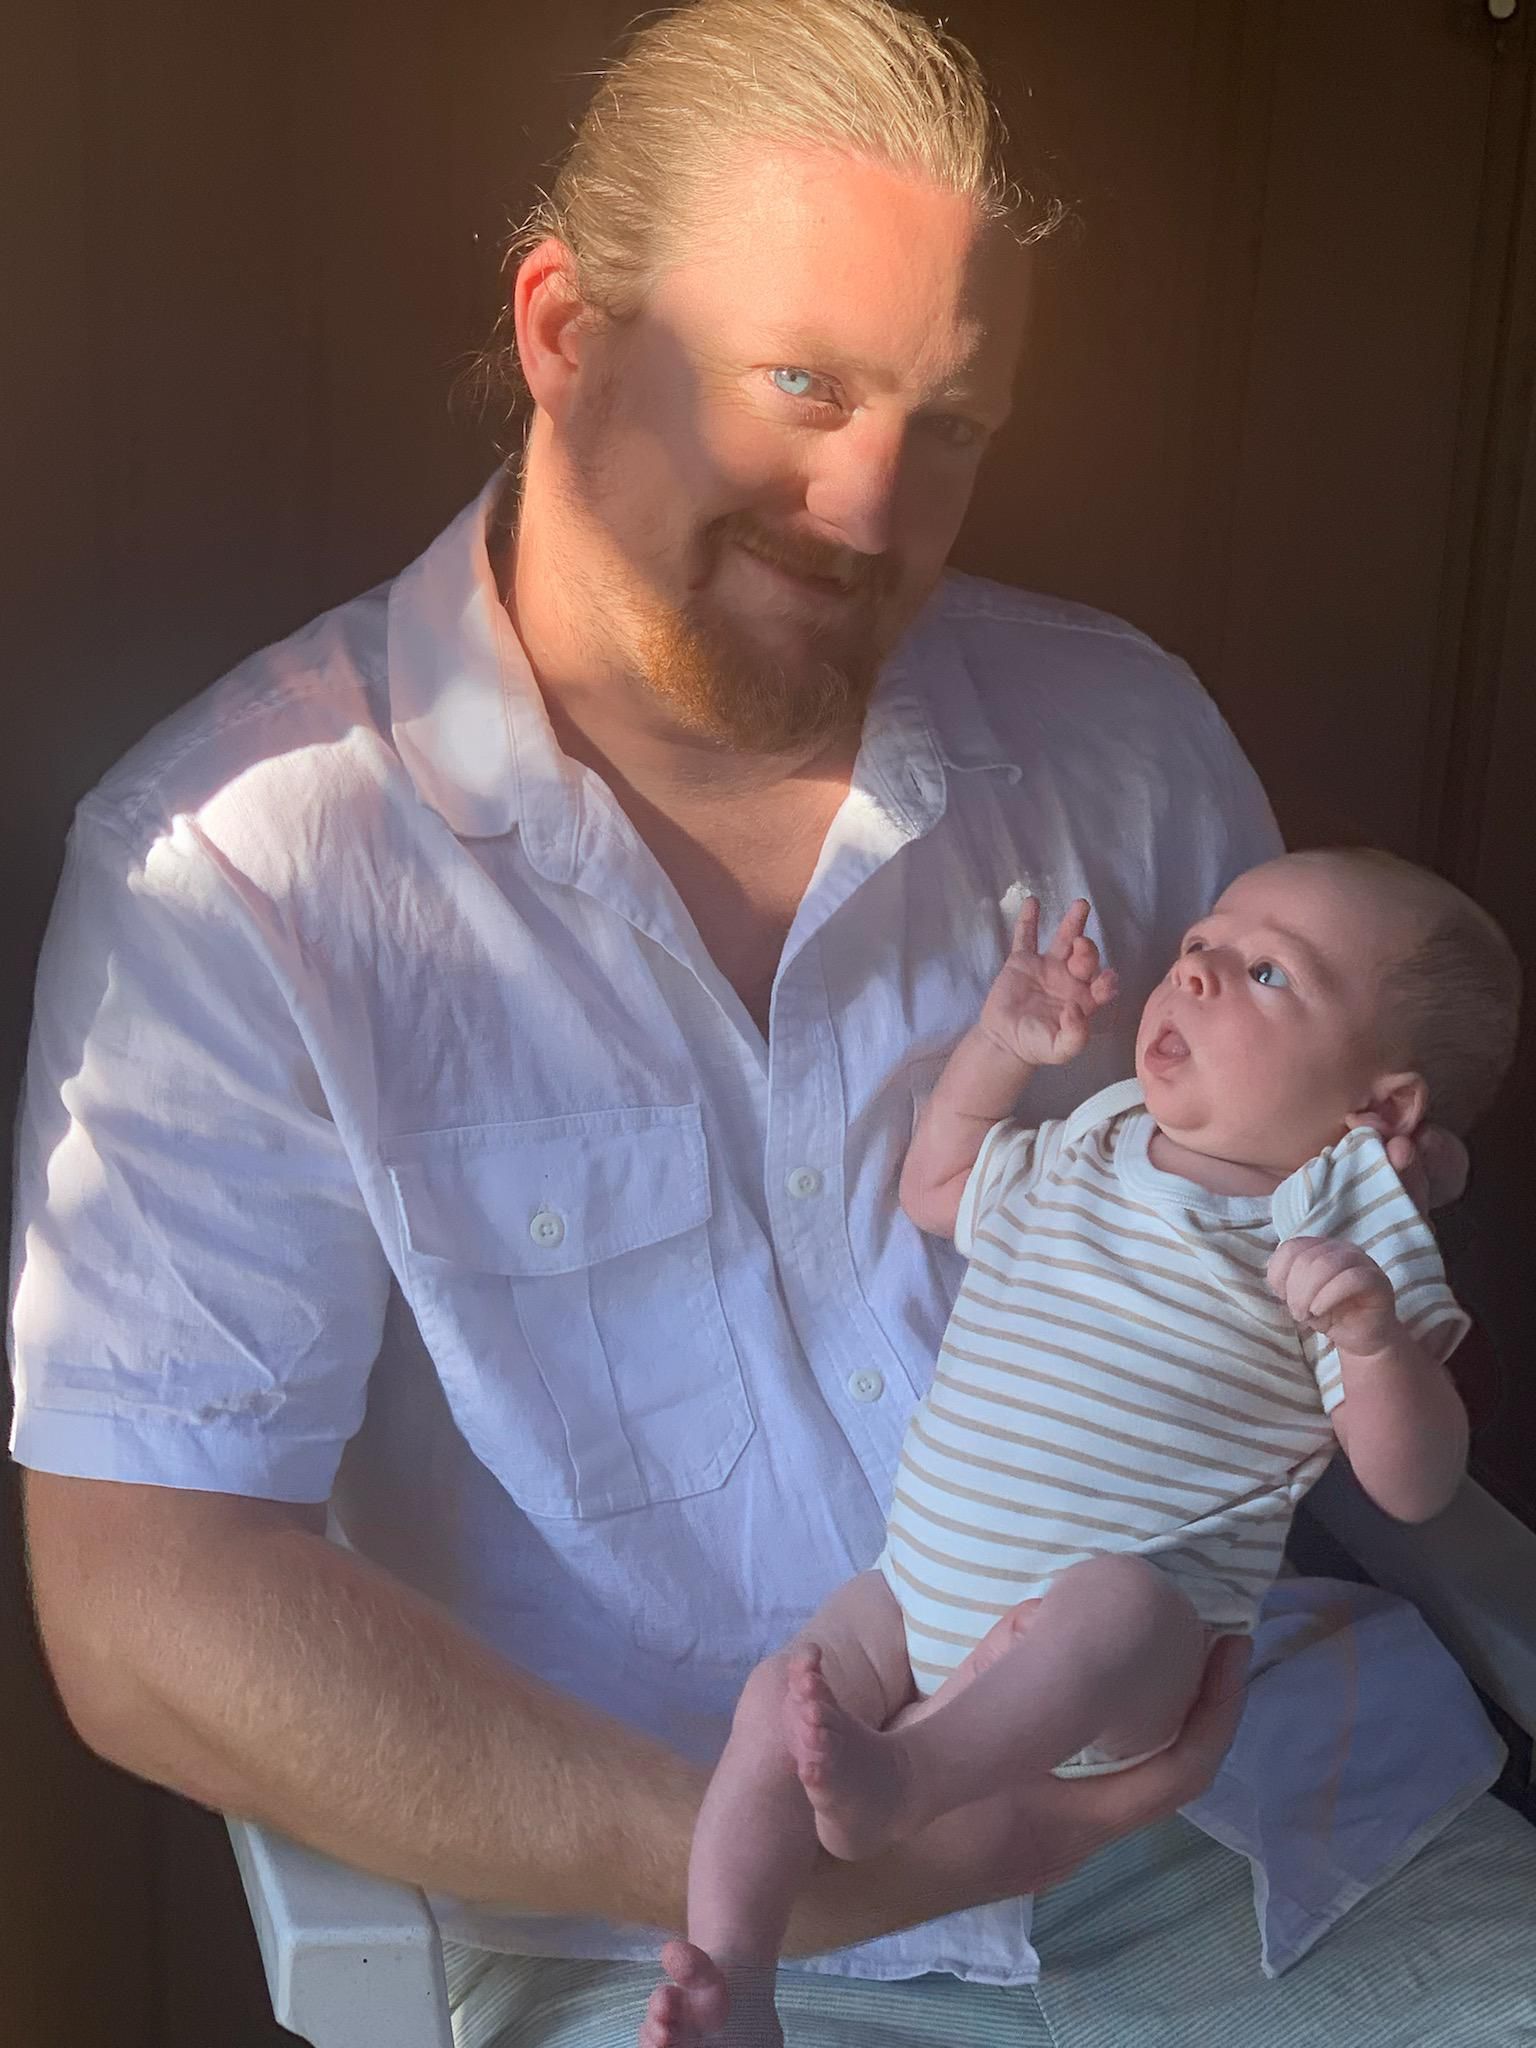 My wife tried to take a nice portrait of myself and my 3 week old.